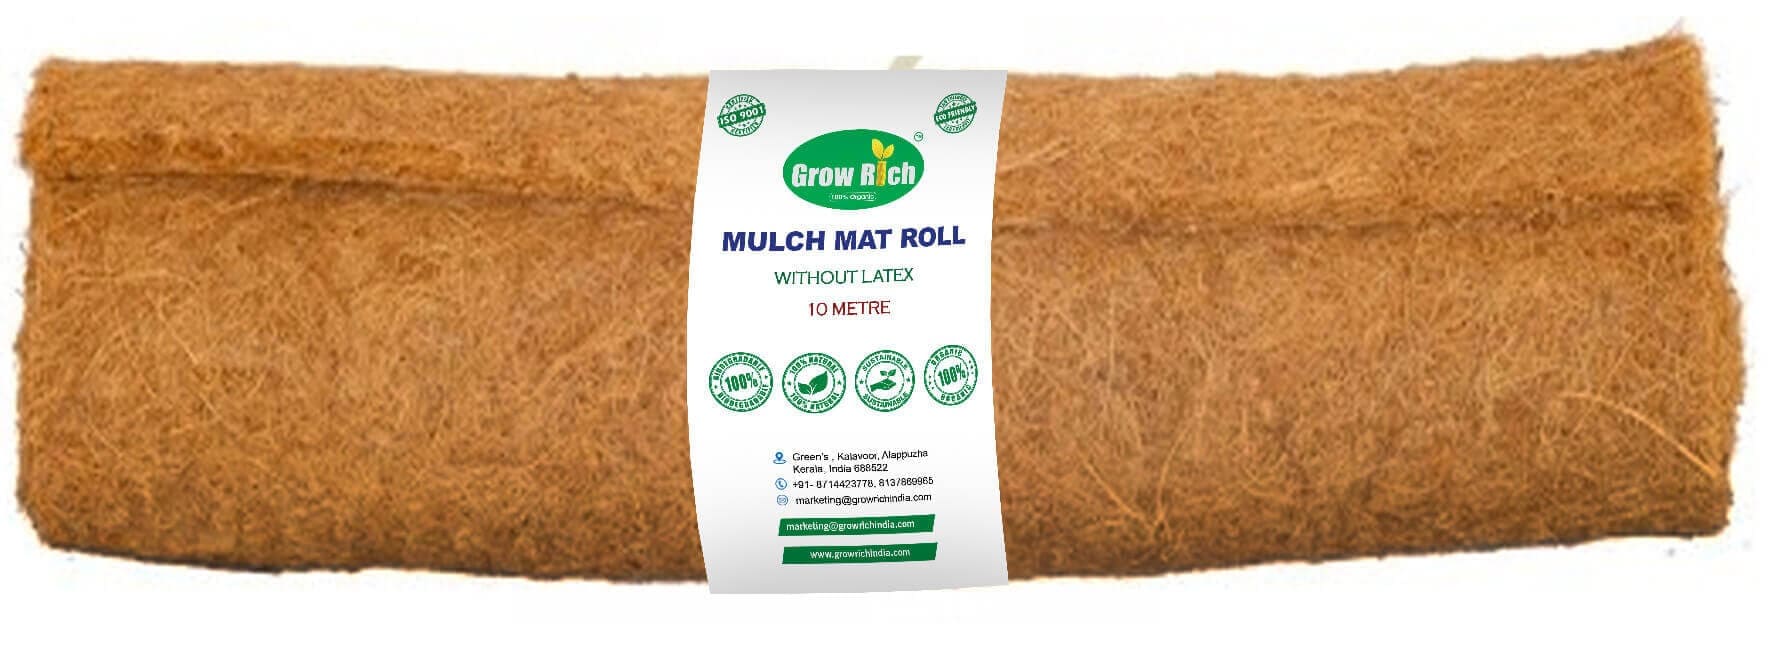 Grow Rich Mulch Mat Roll Without Latex 10m 